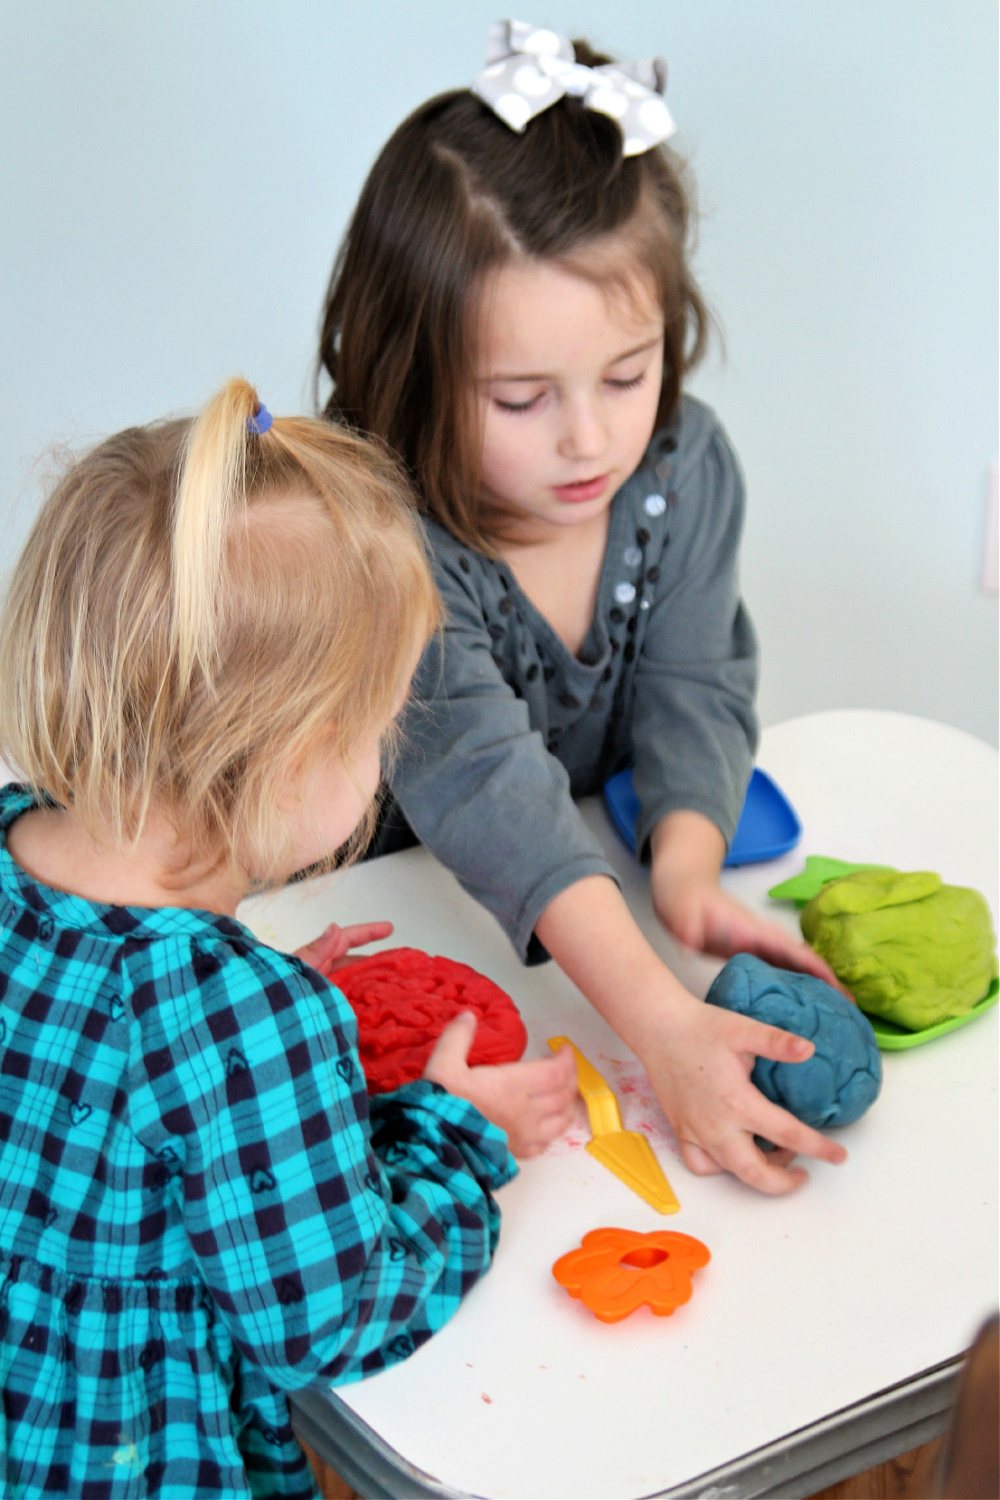 Making modeling playdough with or for your children is fun! Easy recipe for colorful, soft and just right for non-technical creative play.